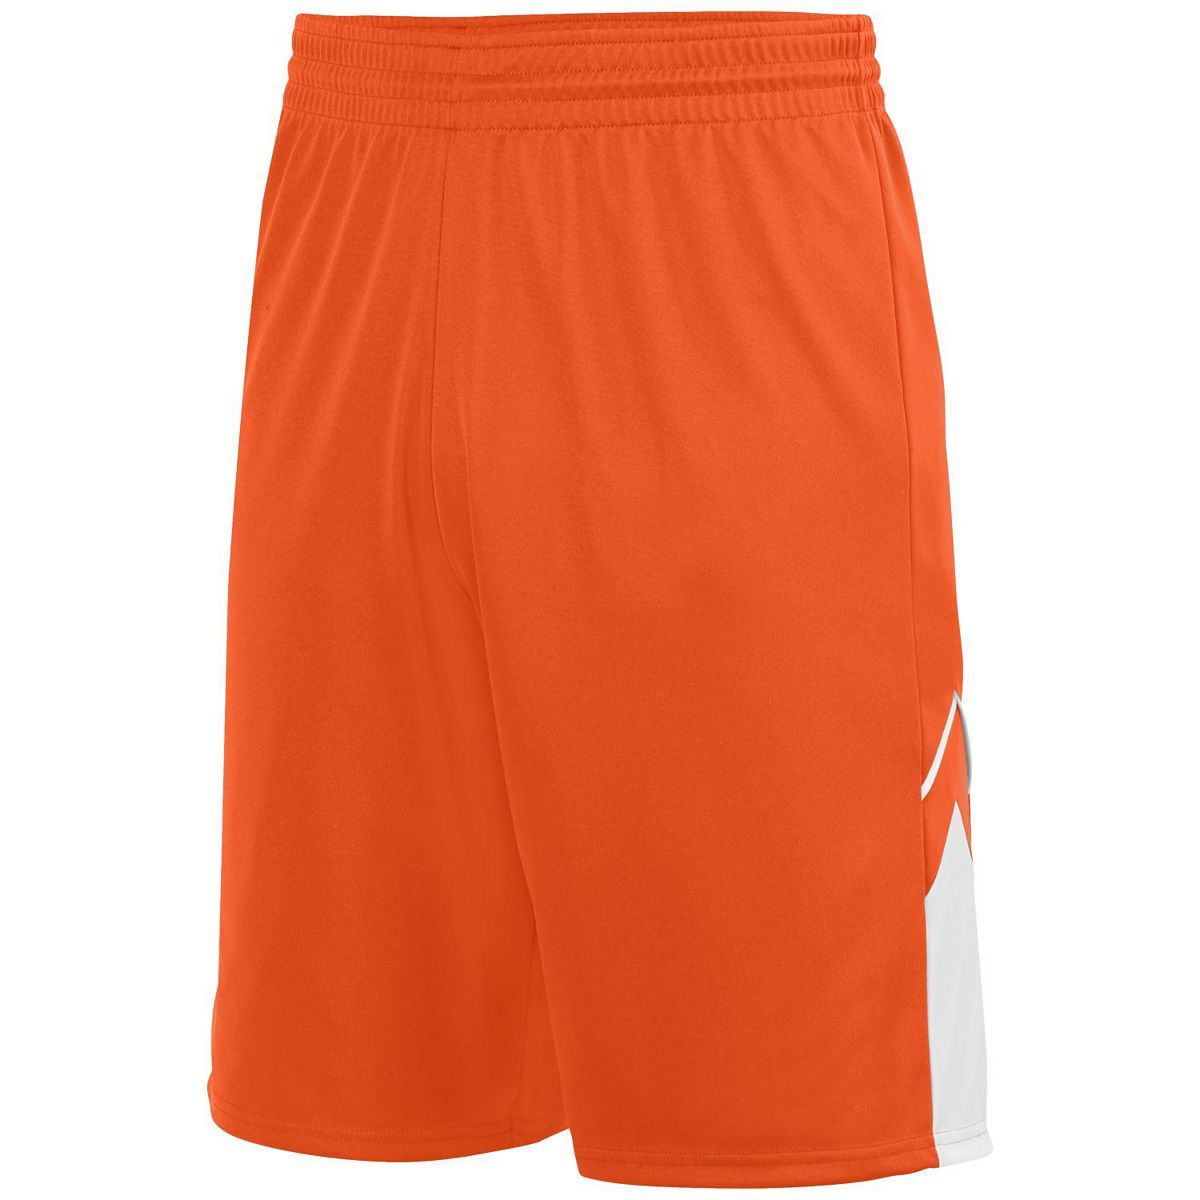 Augusta Sportswear Alley-Oop Reversible Shorts in Orange/White  -Part of the Adult, Adult-Shorts, Augusta-Products, Basketball, All-Sports, All-Sports-1 product lines at KanaleyCreations.com